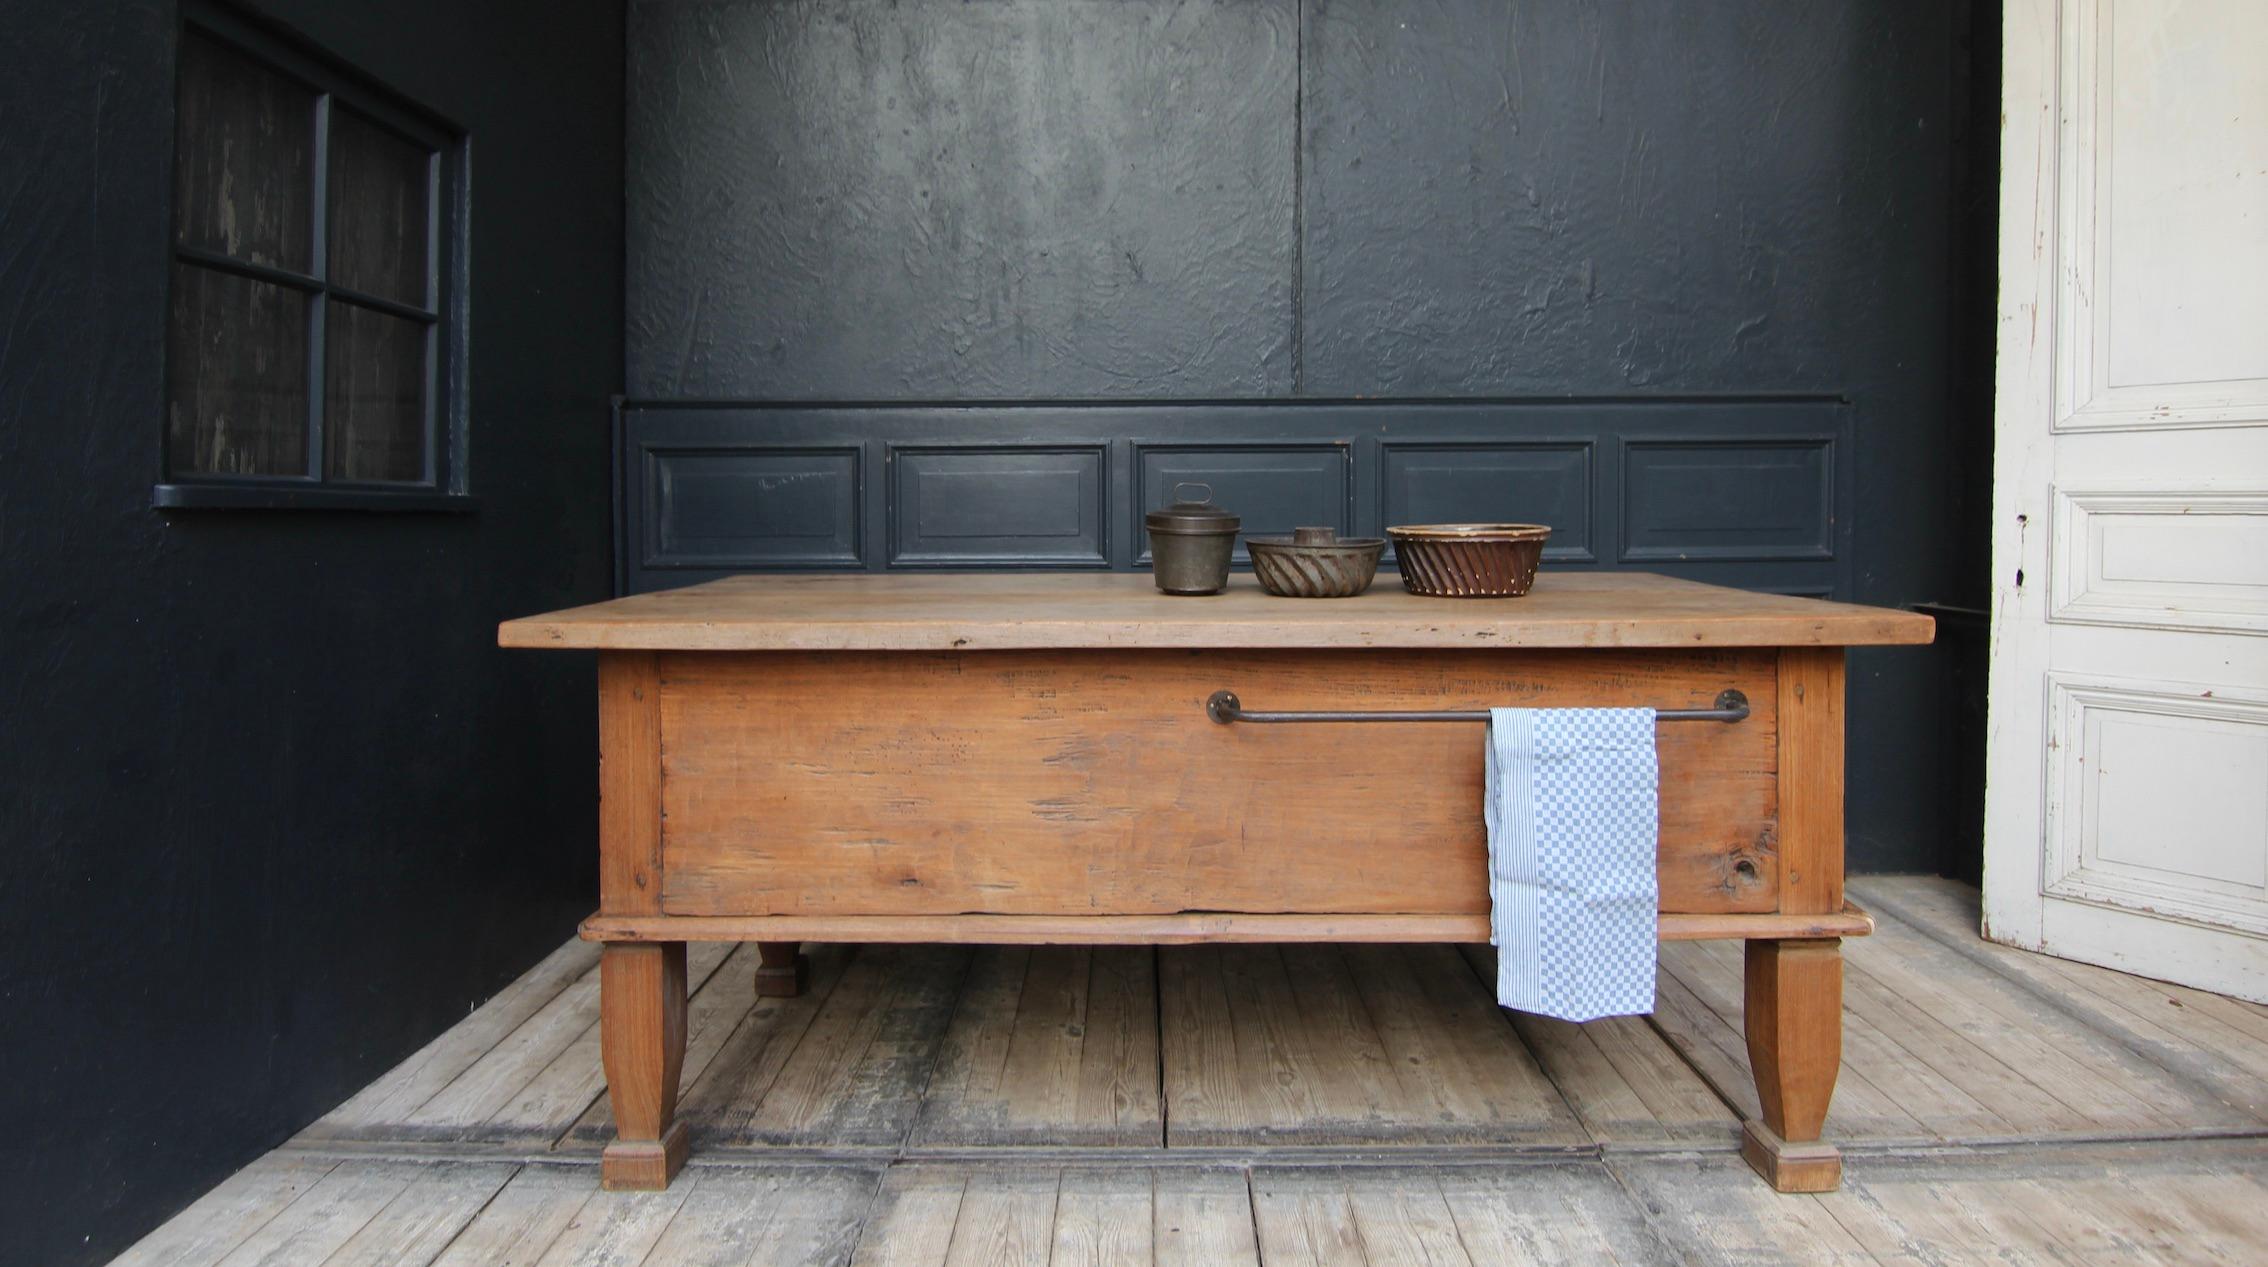 Kitchen preparation table from the early 19th century. Modified for use as a kitchen island.

Solid rectangular oak corpus standing on 4 tapered square legs with very high frame and projecting table top.

The furniture has been exclusively